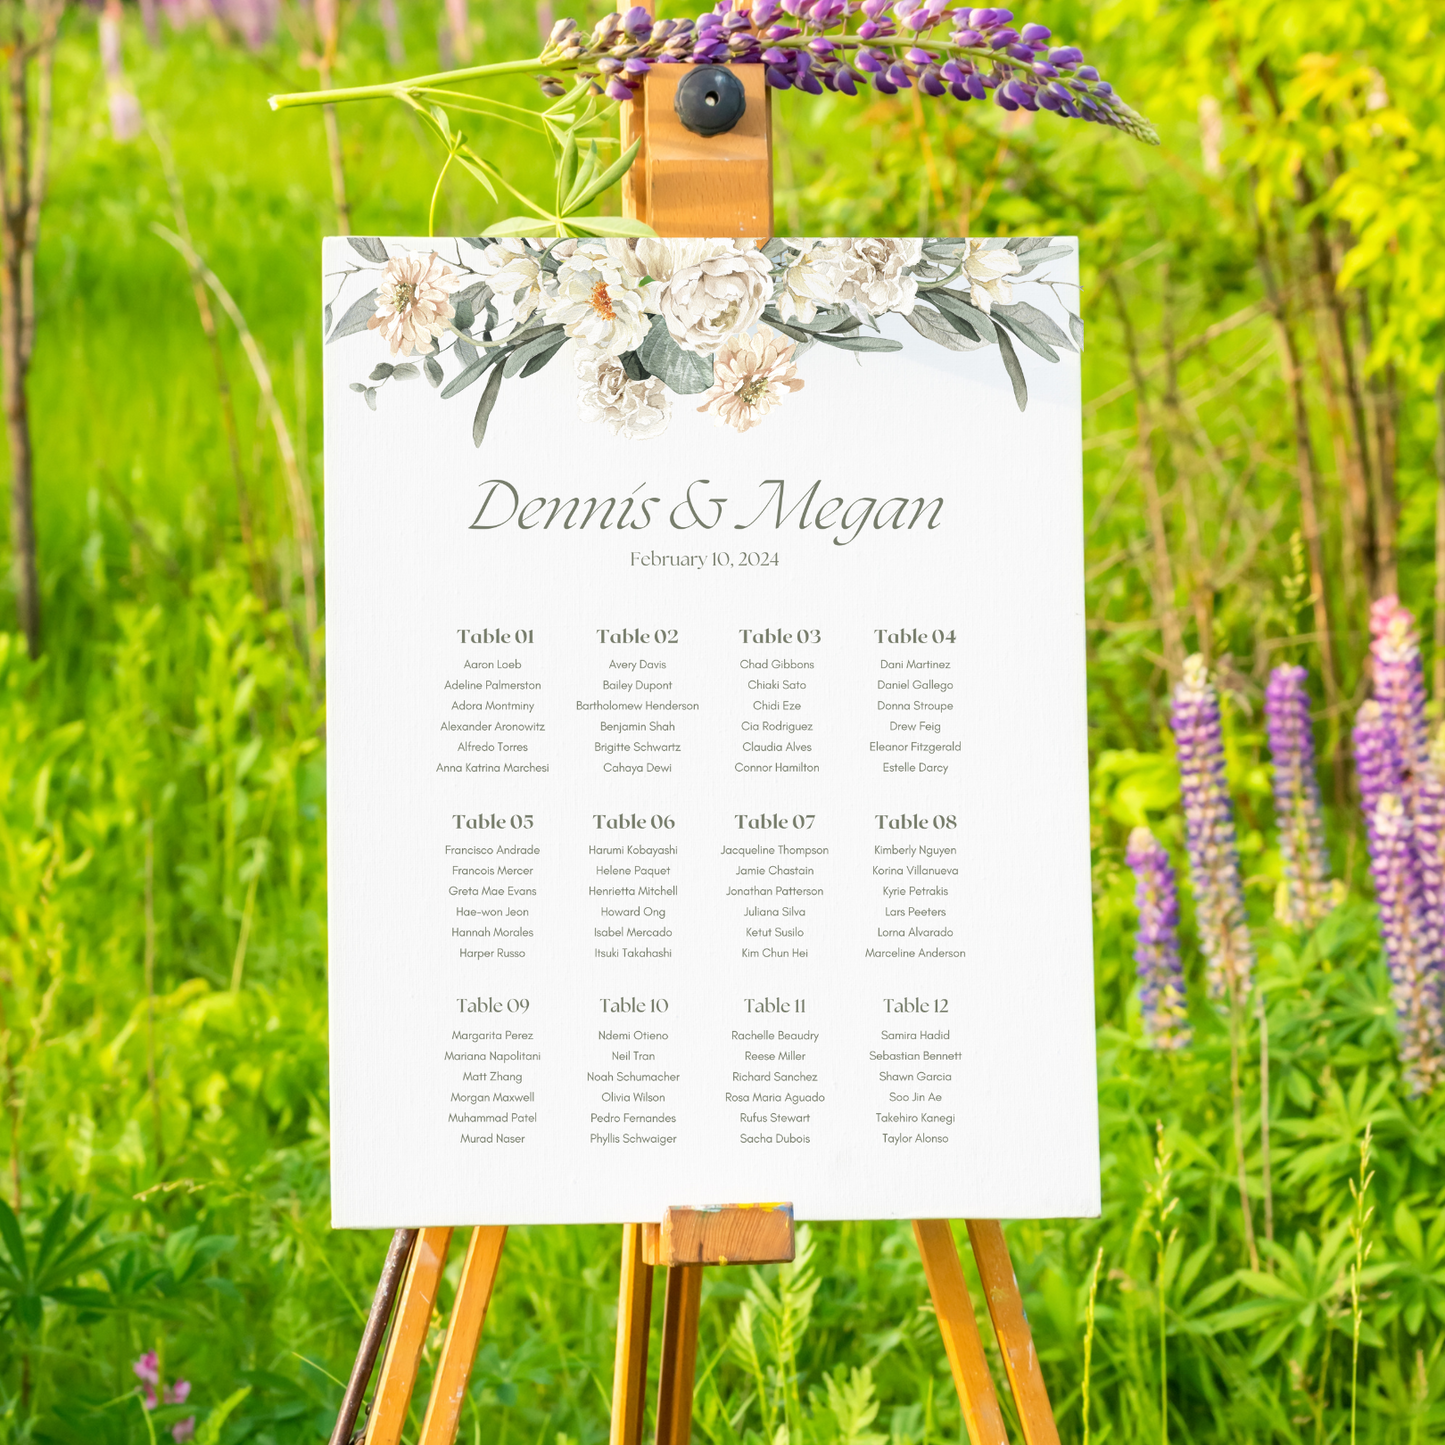 A seating chart sits on a wooden easel in a grassy field. The chart has a floral design on the top and a list of names below.